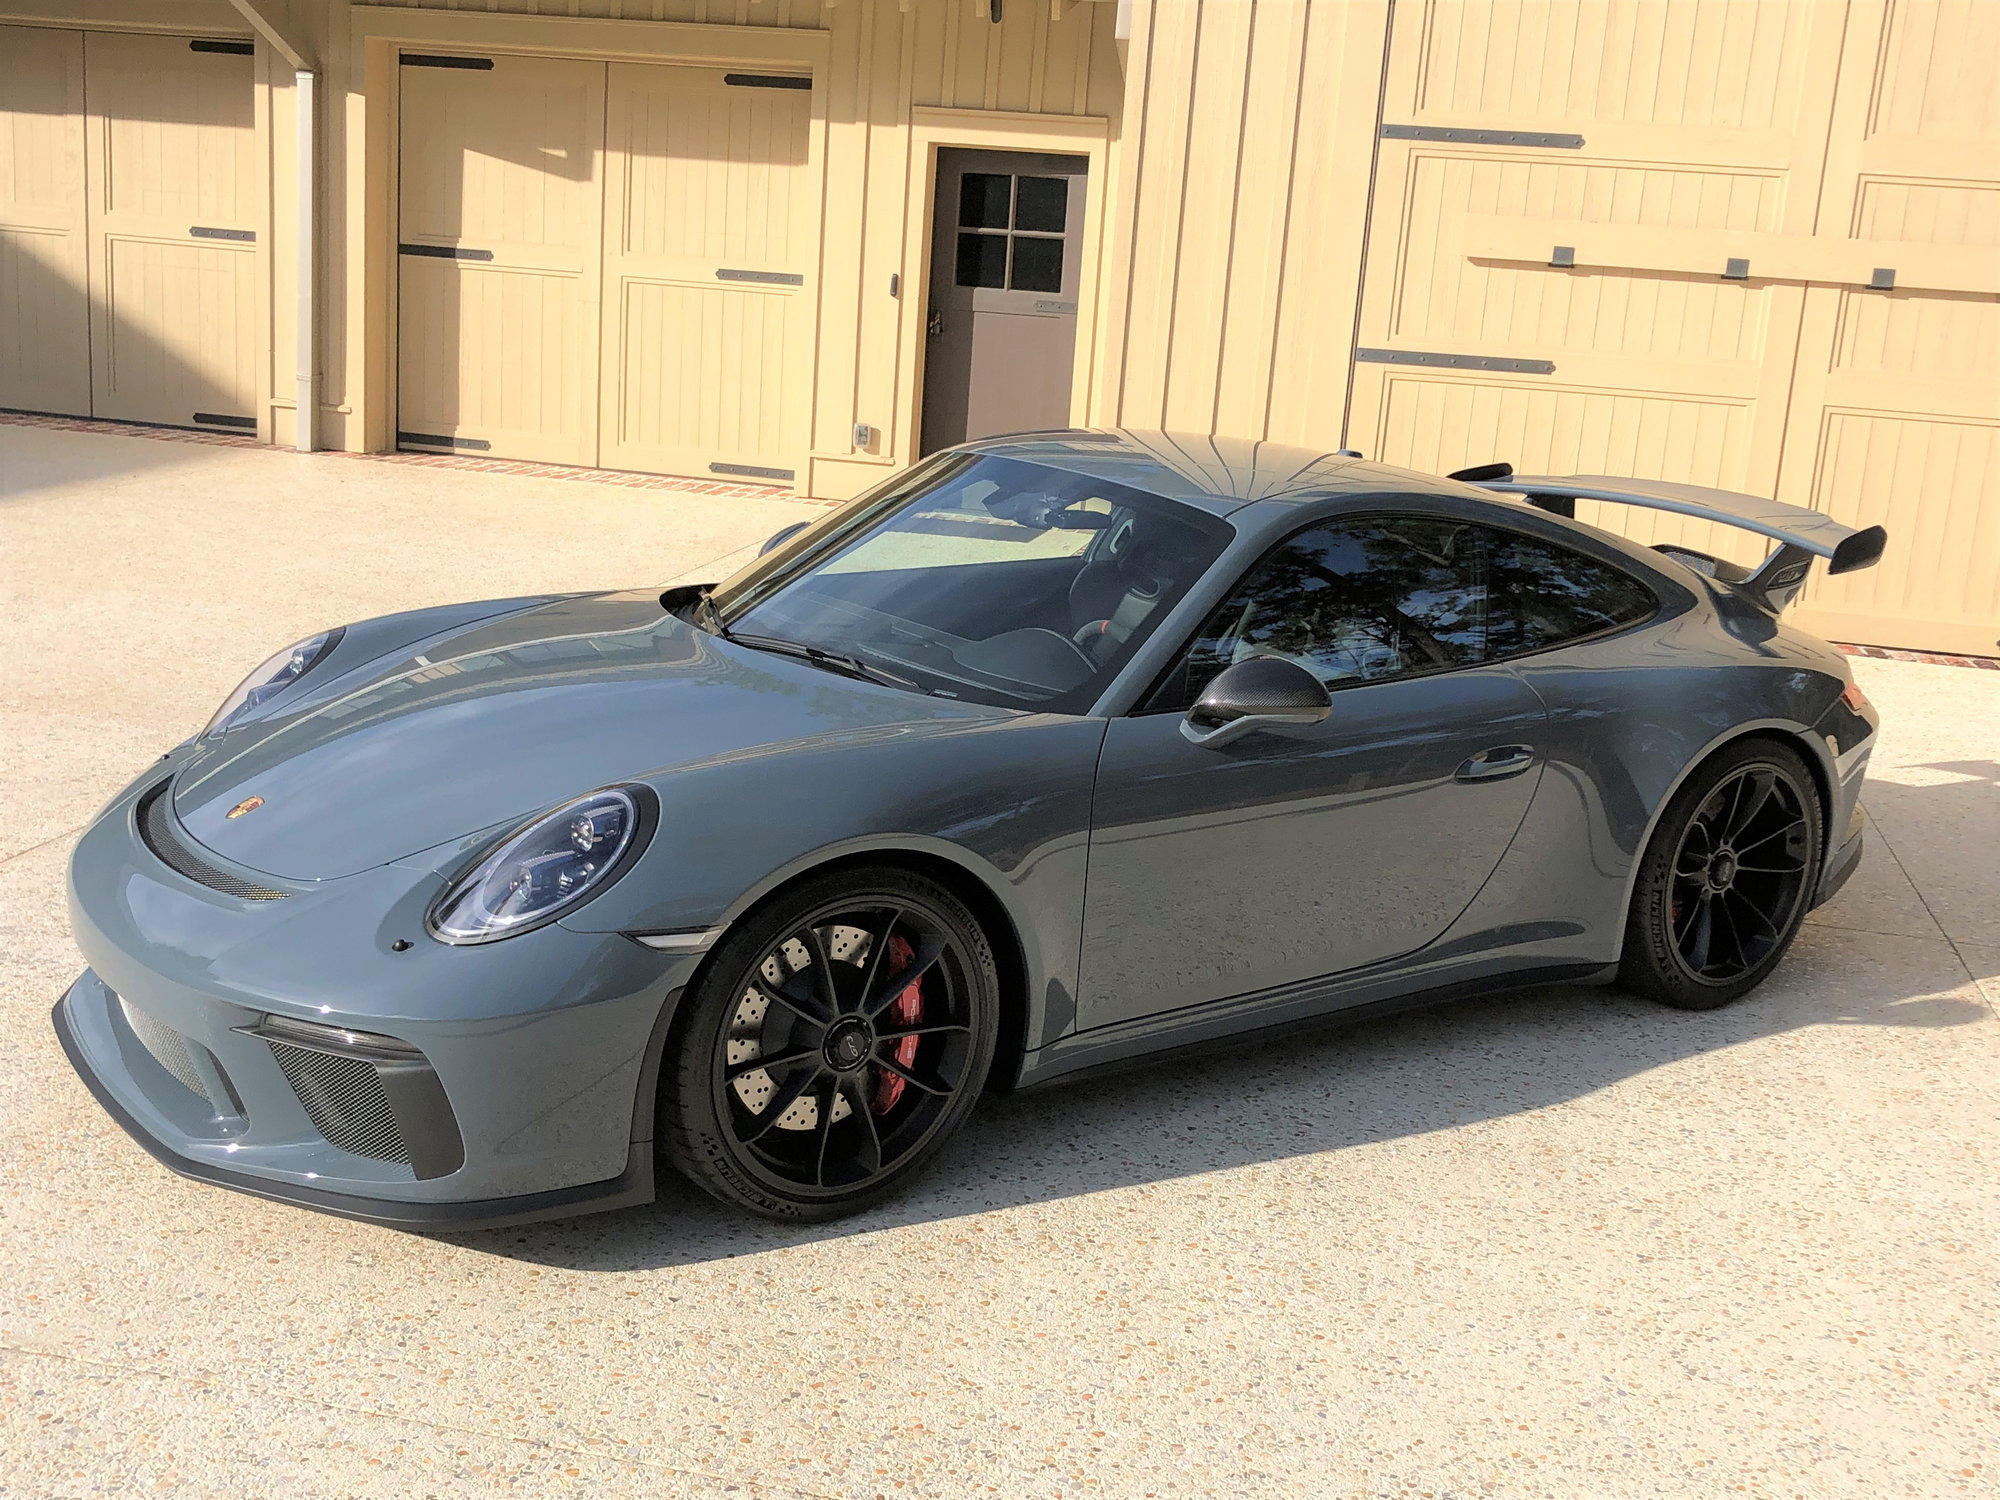 2018 Porsche GT3 - 2018 GT3...311 Miles...Graphite Blue...Well Equipped - Used - VIN WP0AC2A96JS174360 - 311 Miles - 6 cyl - 2WD - Automatic - Coupe - Blue - Jacksonville, FL 32224, United States